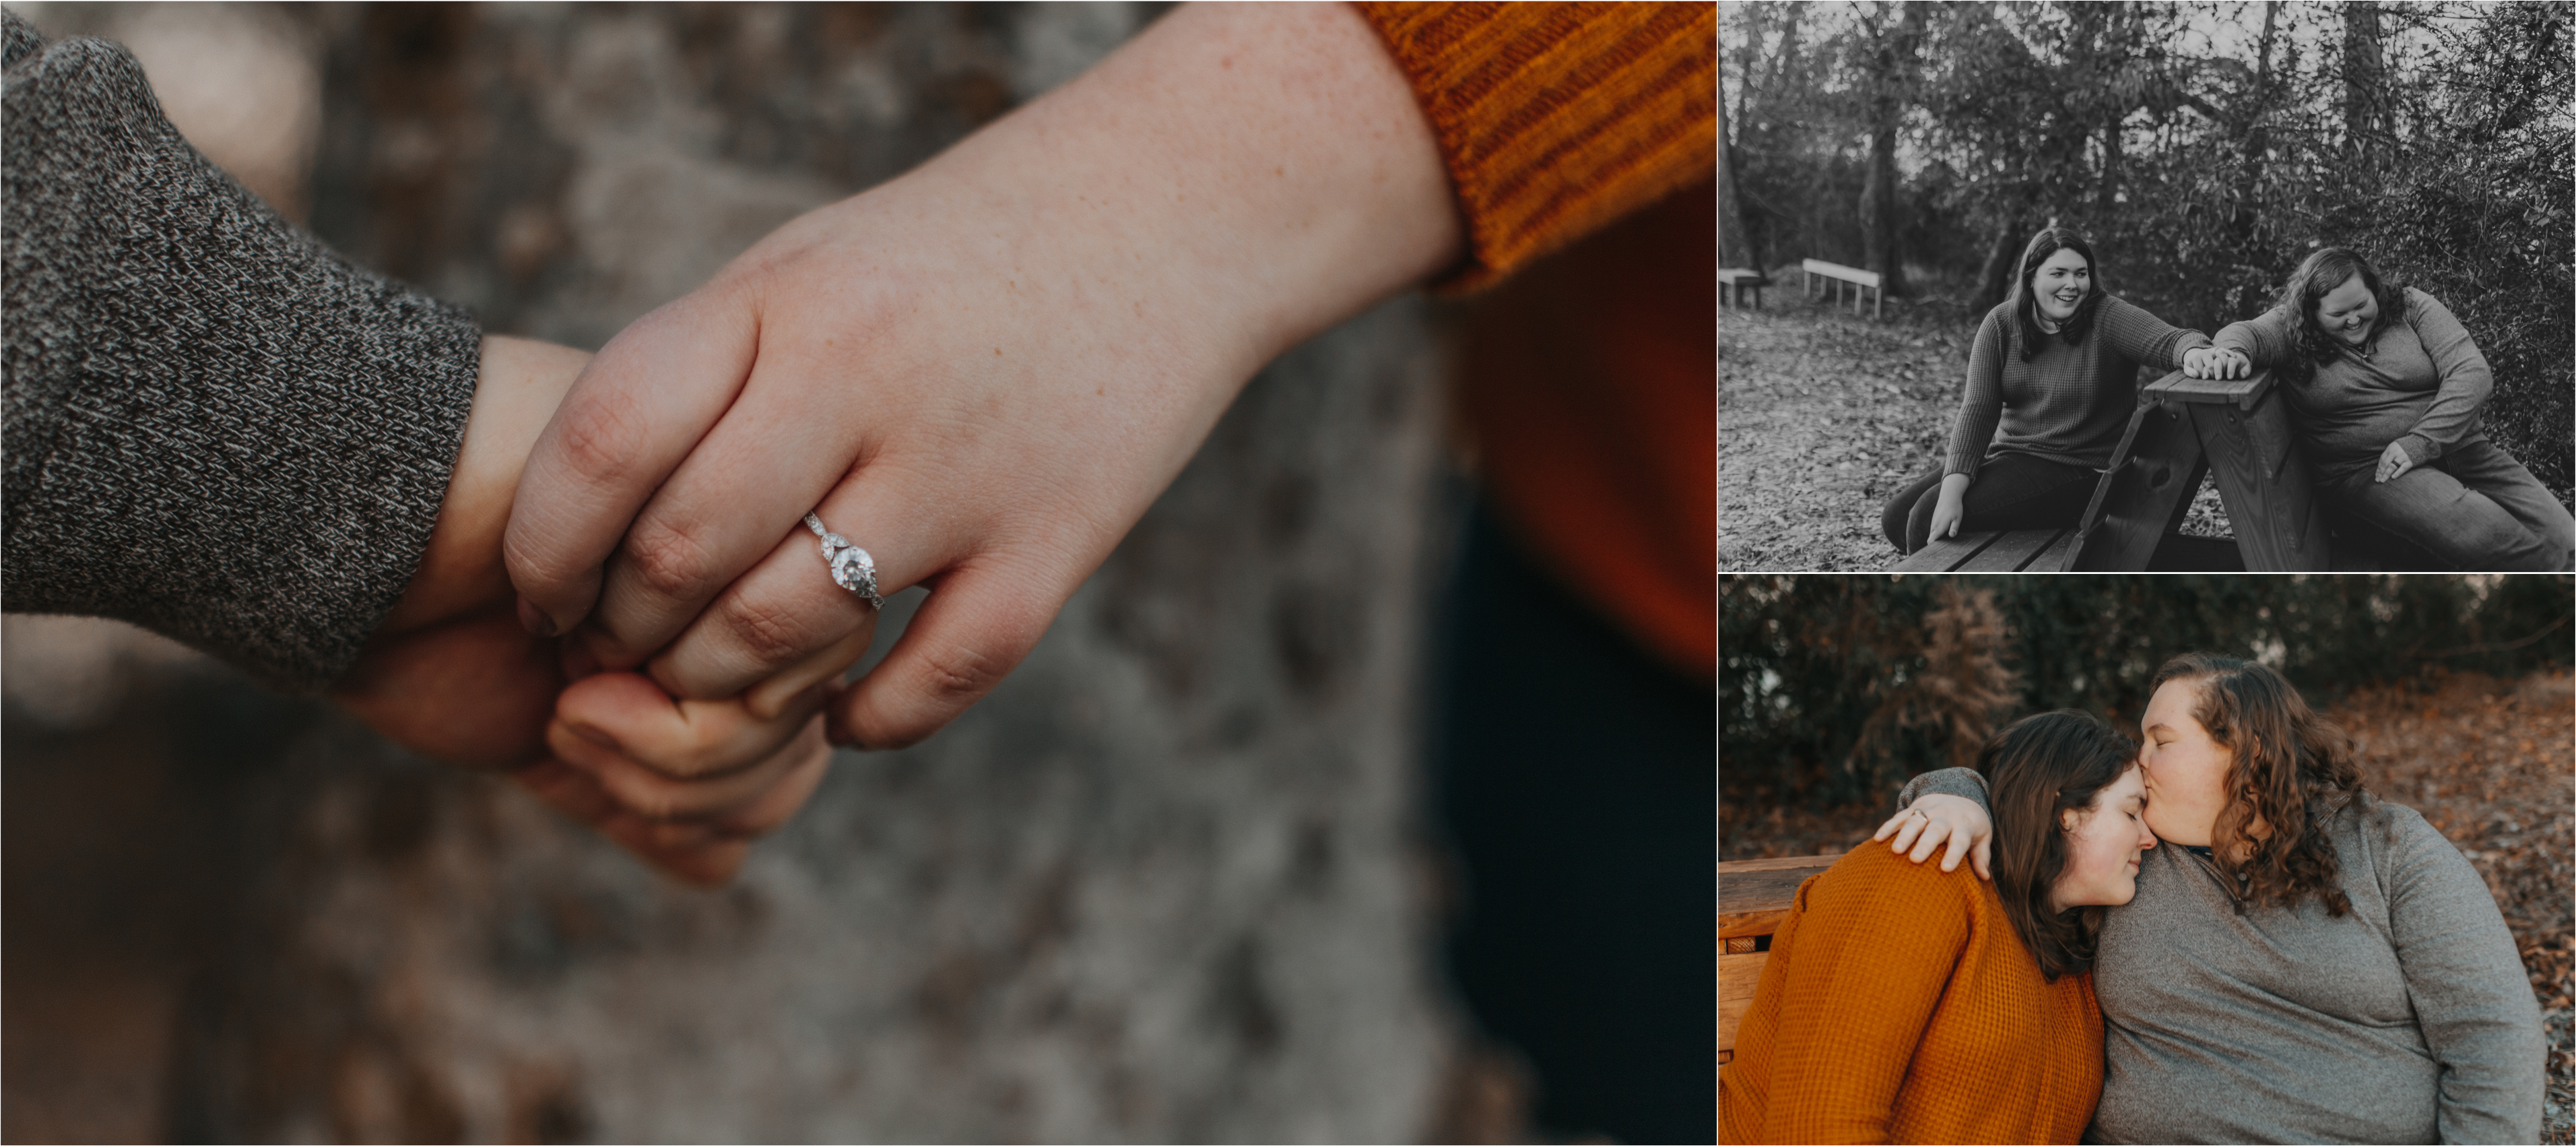 Amber + Katie | Fall Engagement Session at Sleepy Hole Park | Suffolk Virginia Engagement Session | Hampton Roads Virginia Engagements and Weddings